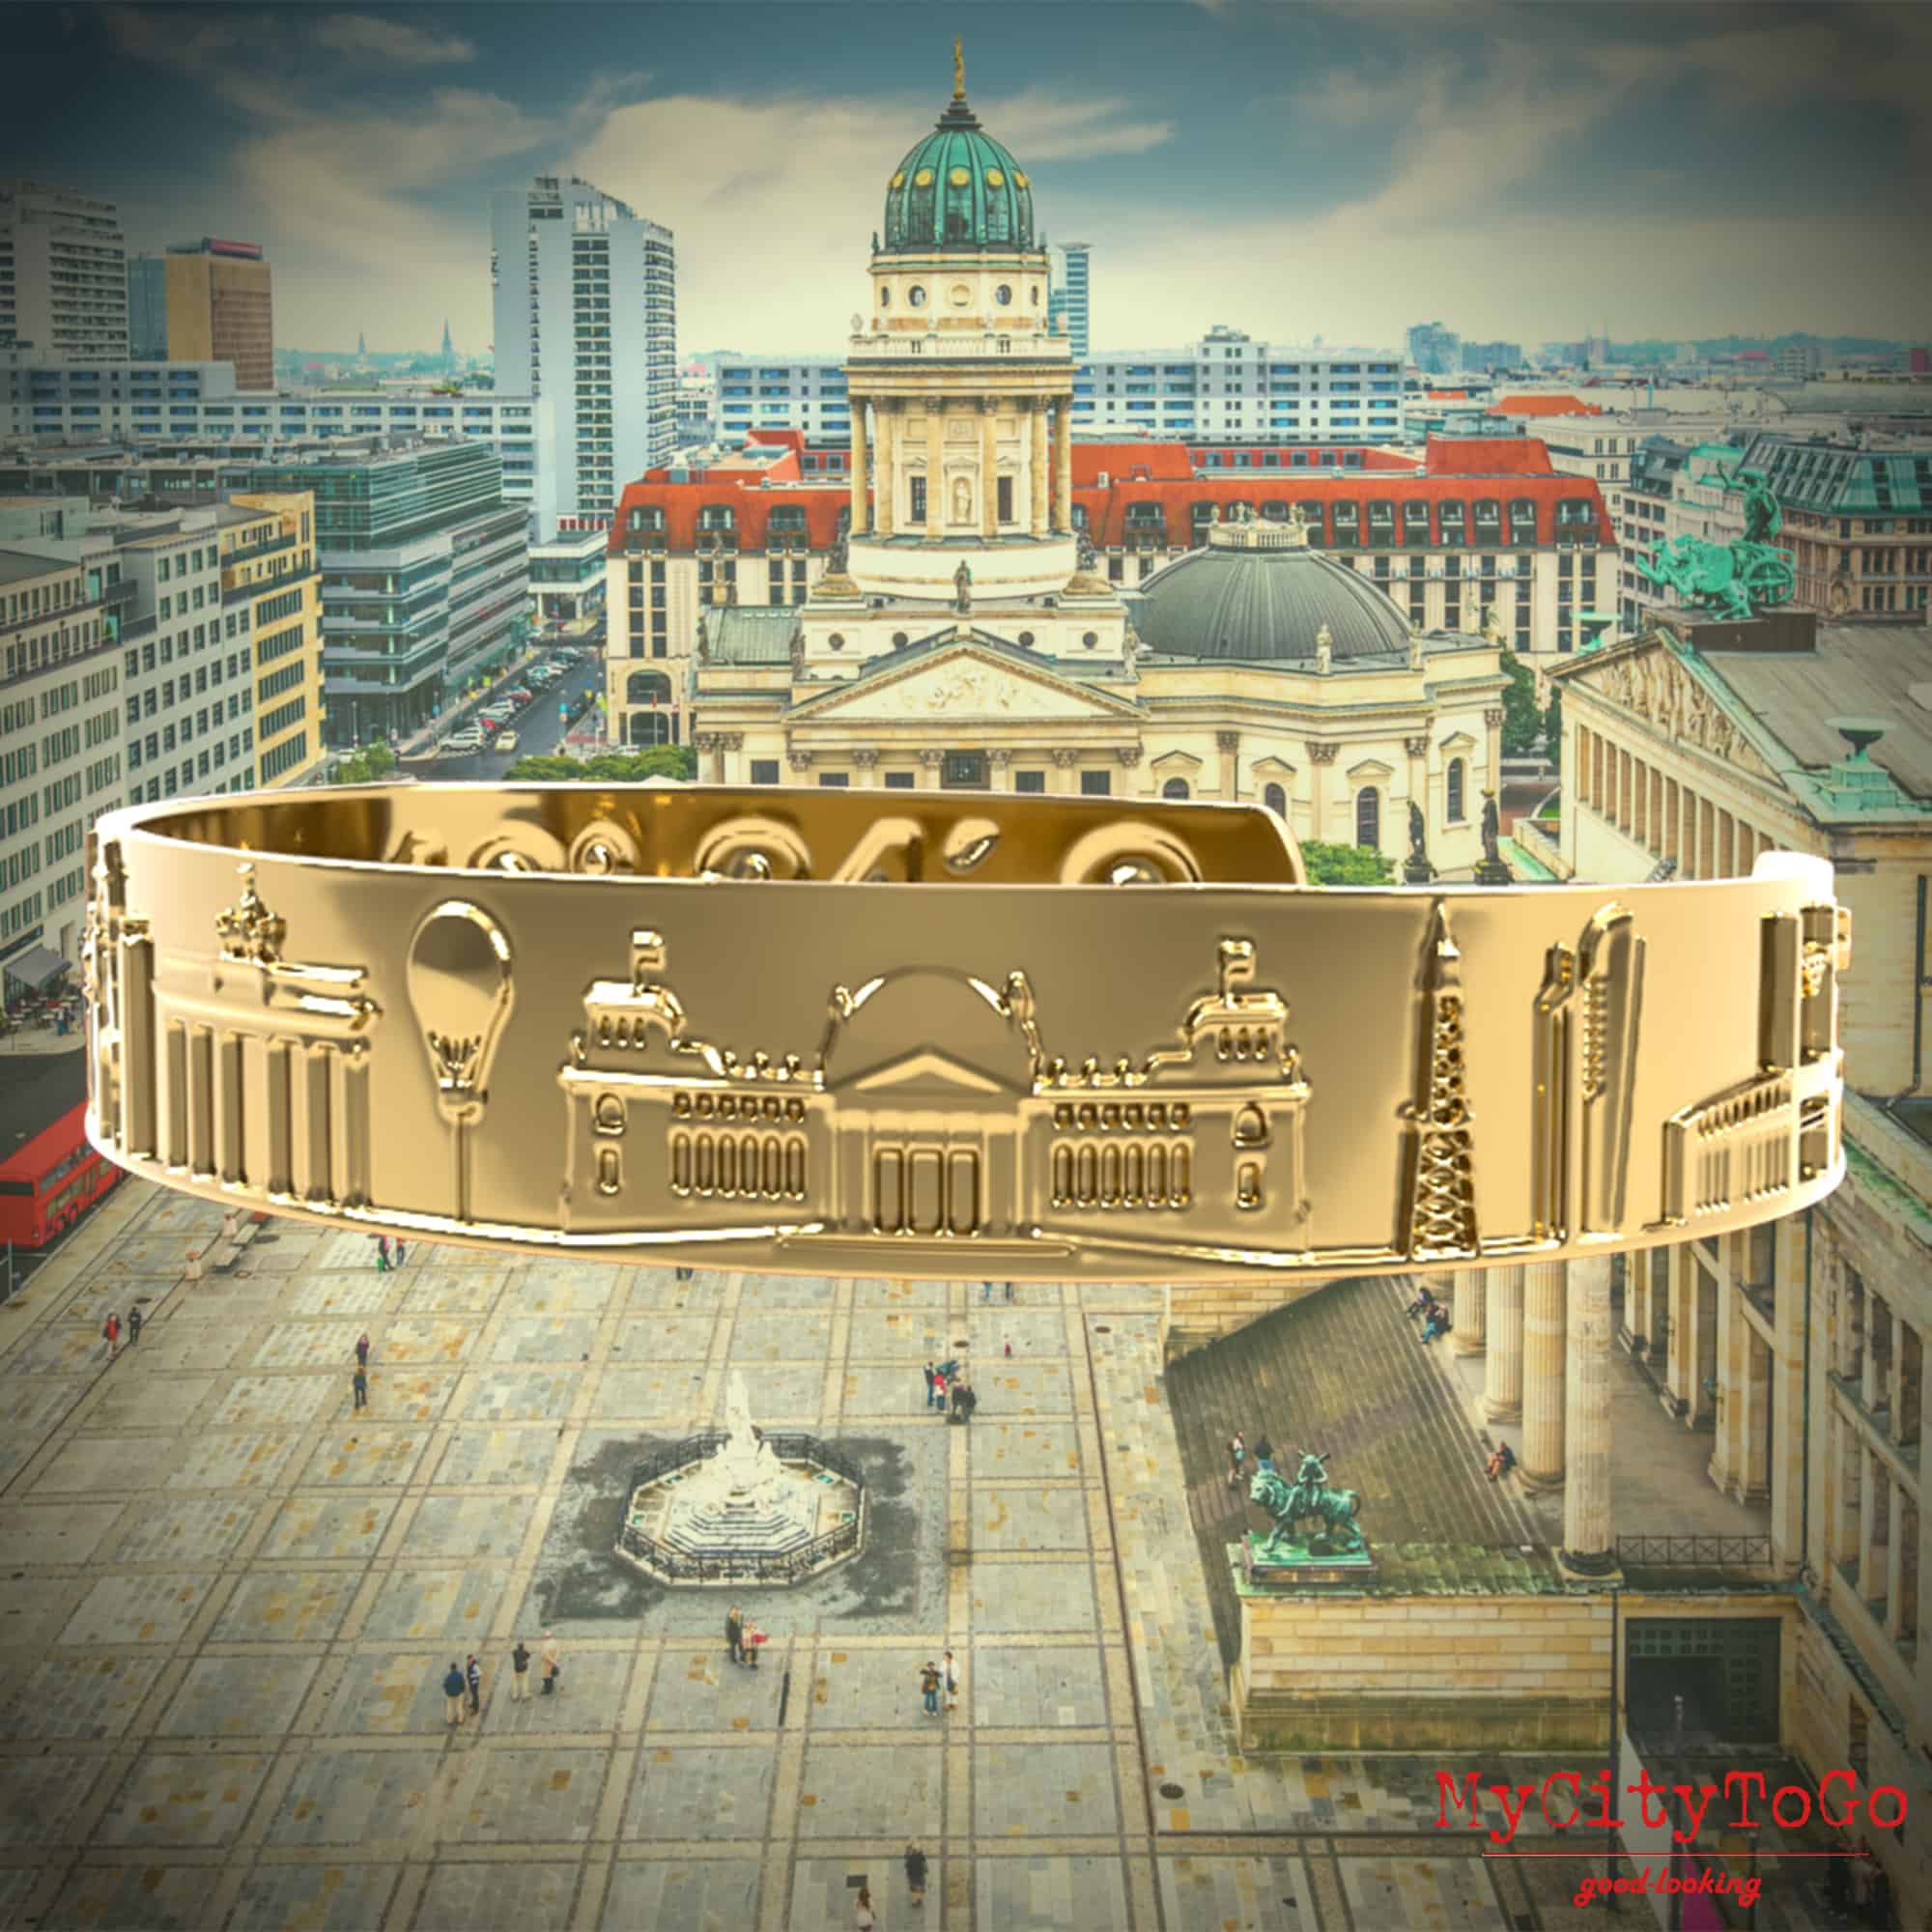 A golden bracelet with famous motifs and coordinates from the city of Berlin